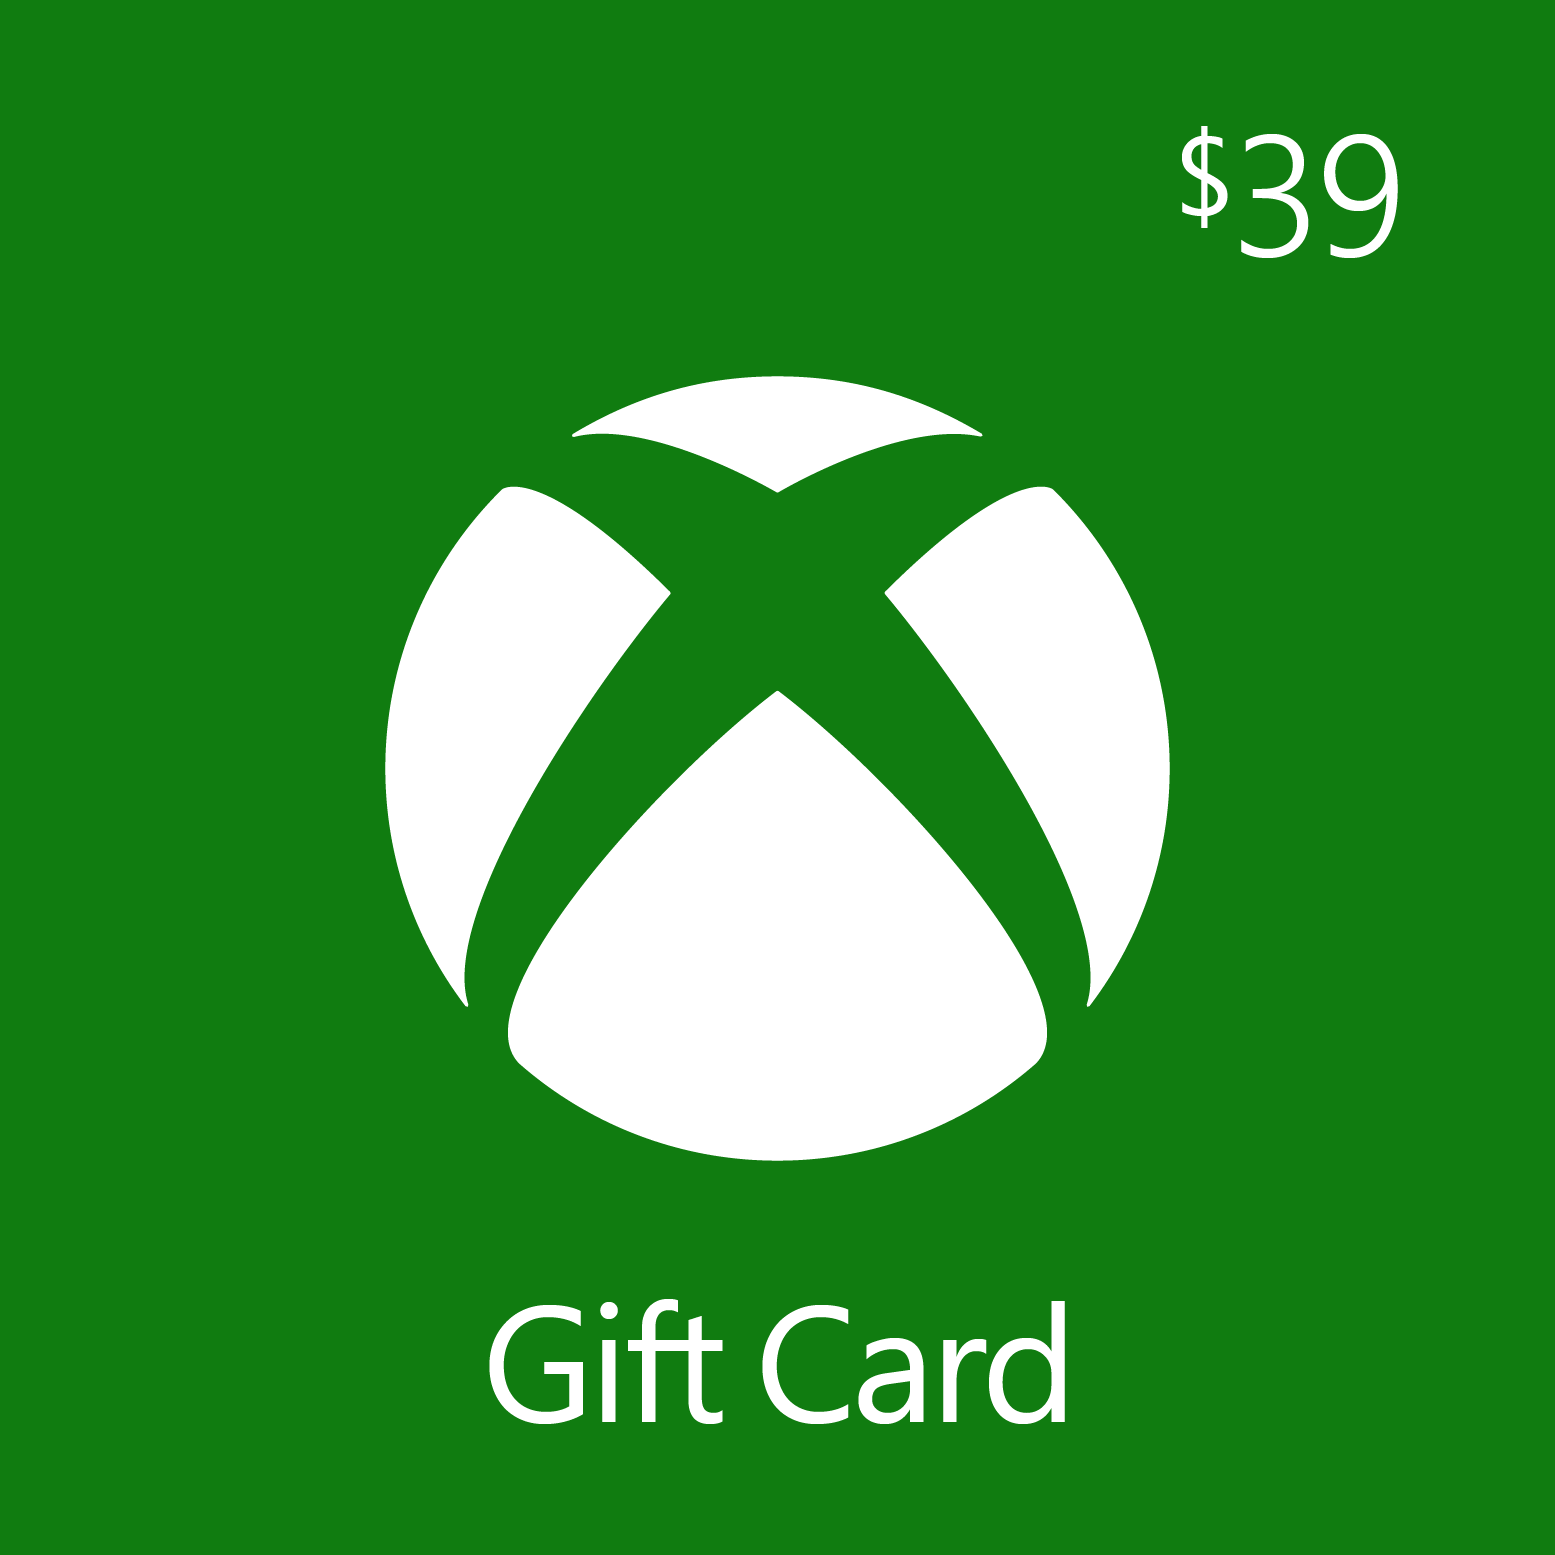 can you gift someone xbox live gold